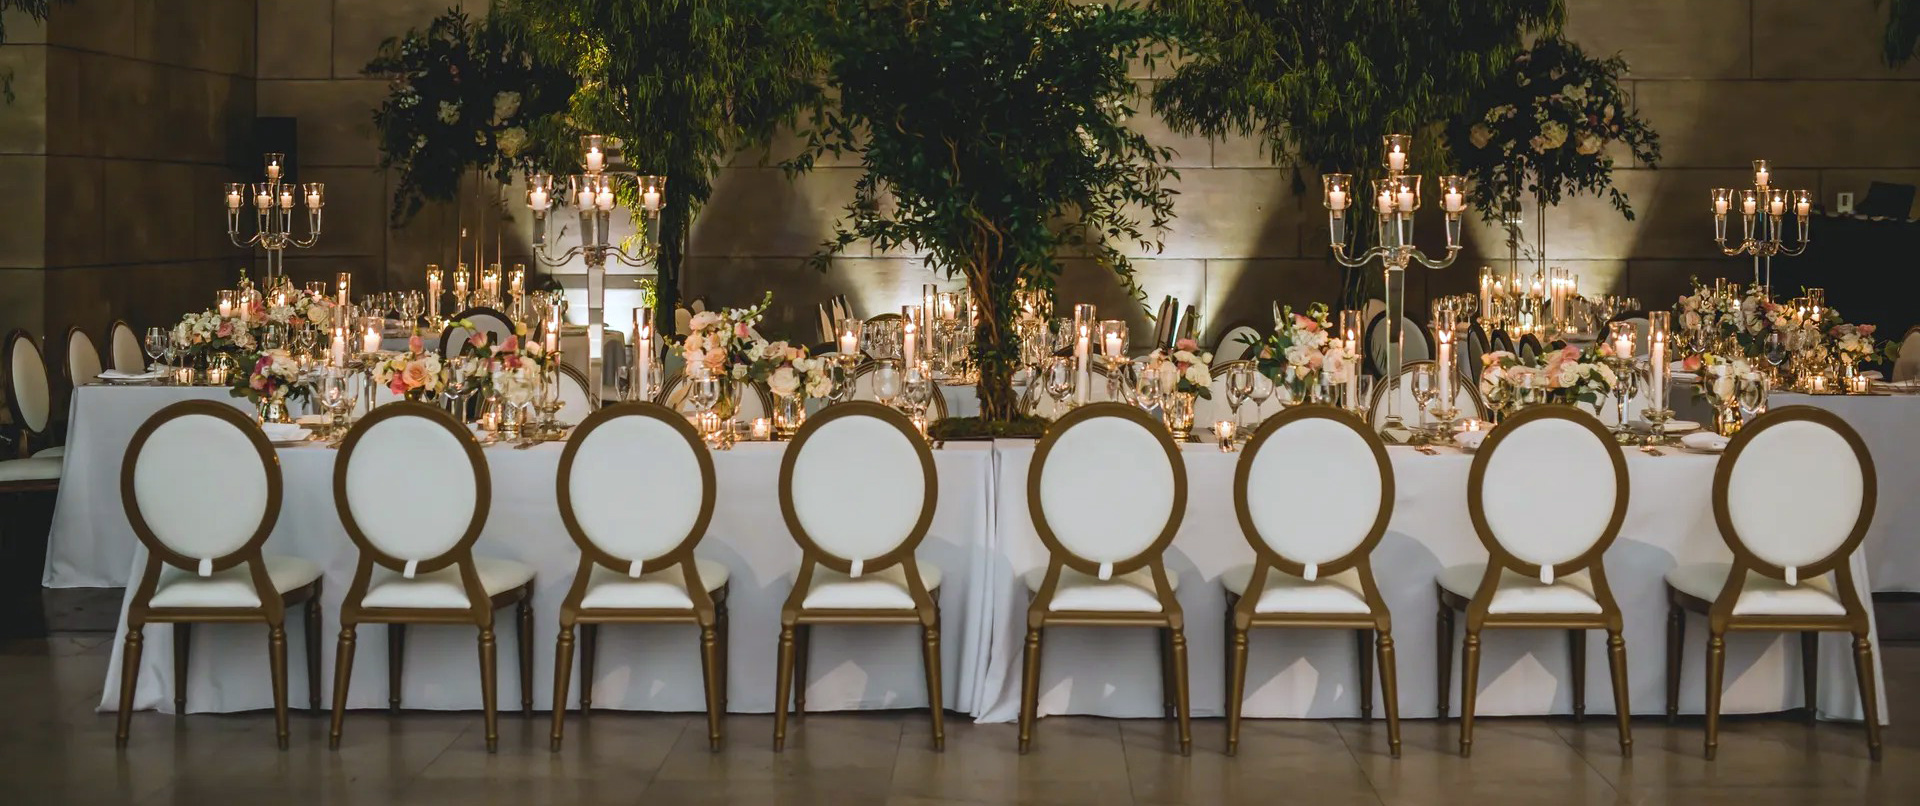 Wedding & Event Chairs